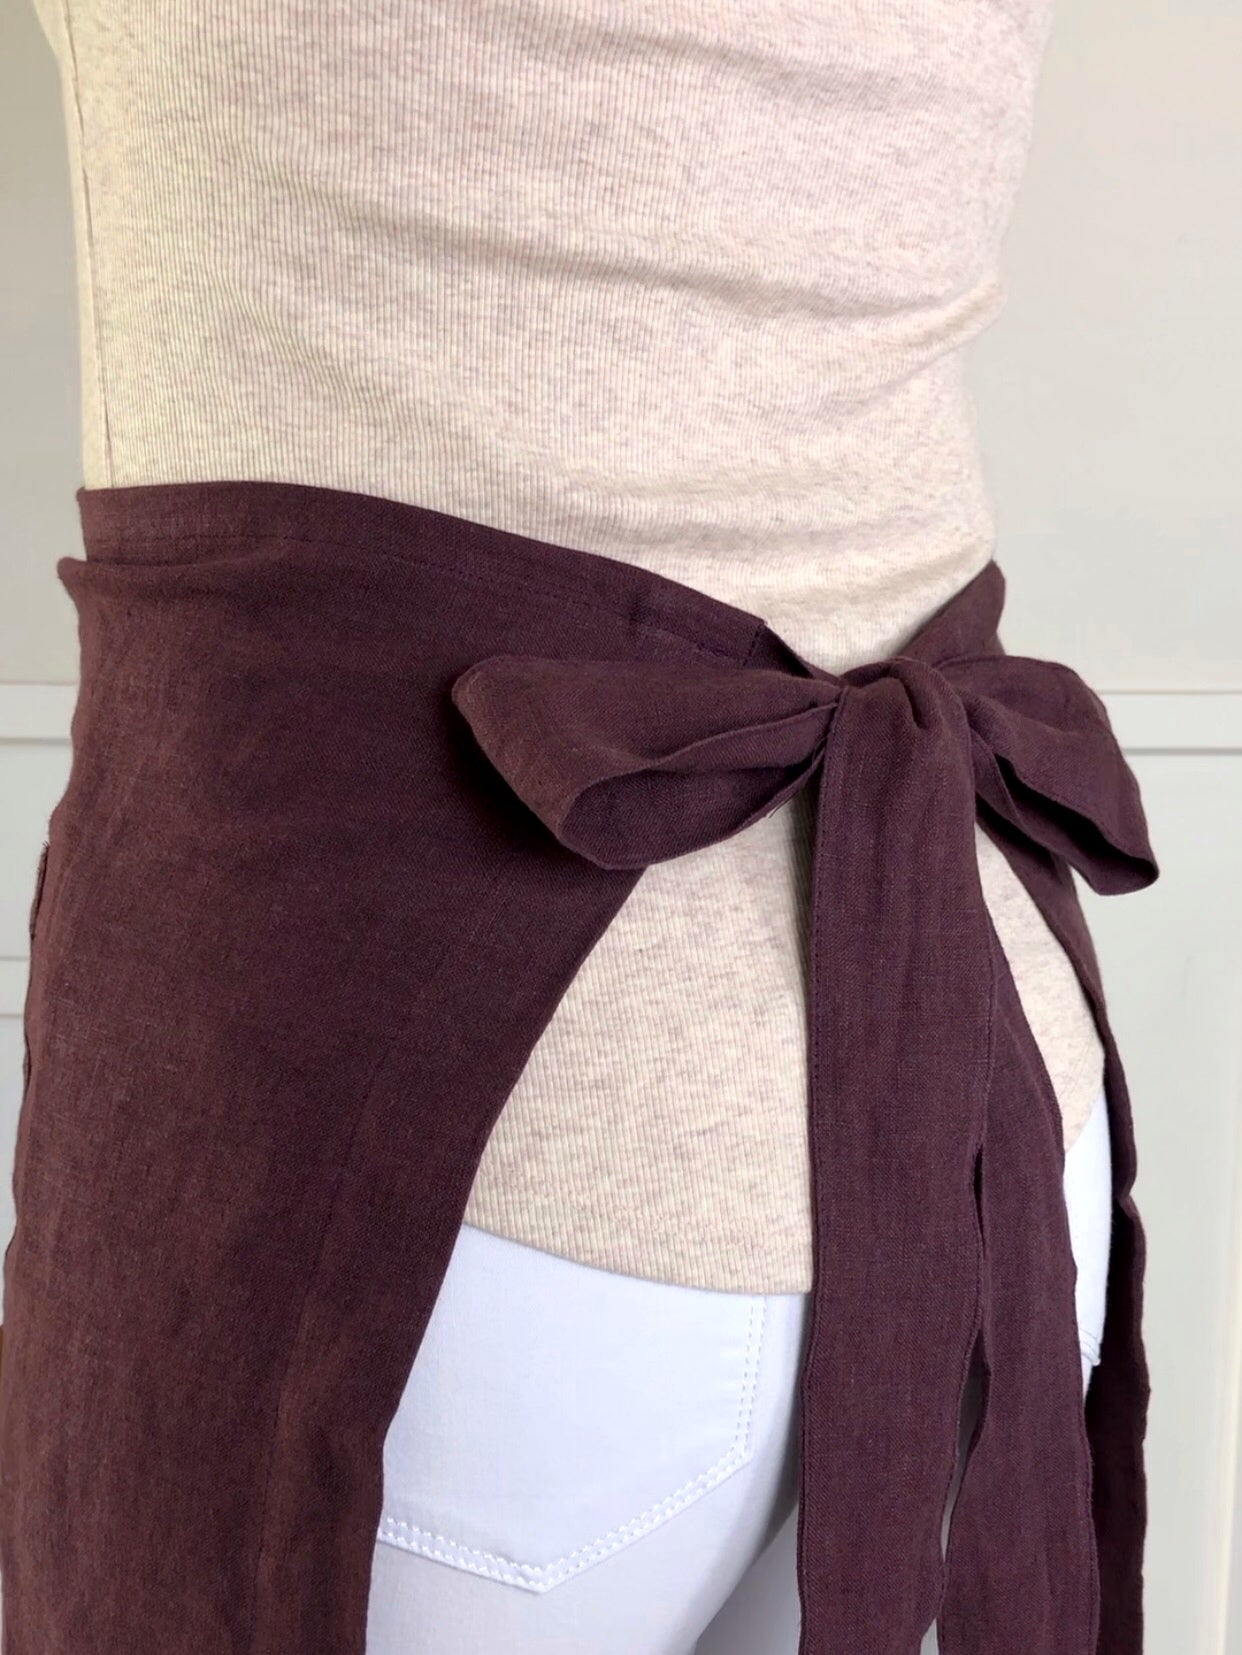 100% linen half waist apron. Large front pocket. Long ties can be fastened at the back or at the front, creating a large bow. Plum colour way.